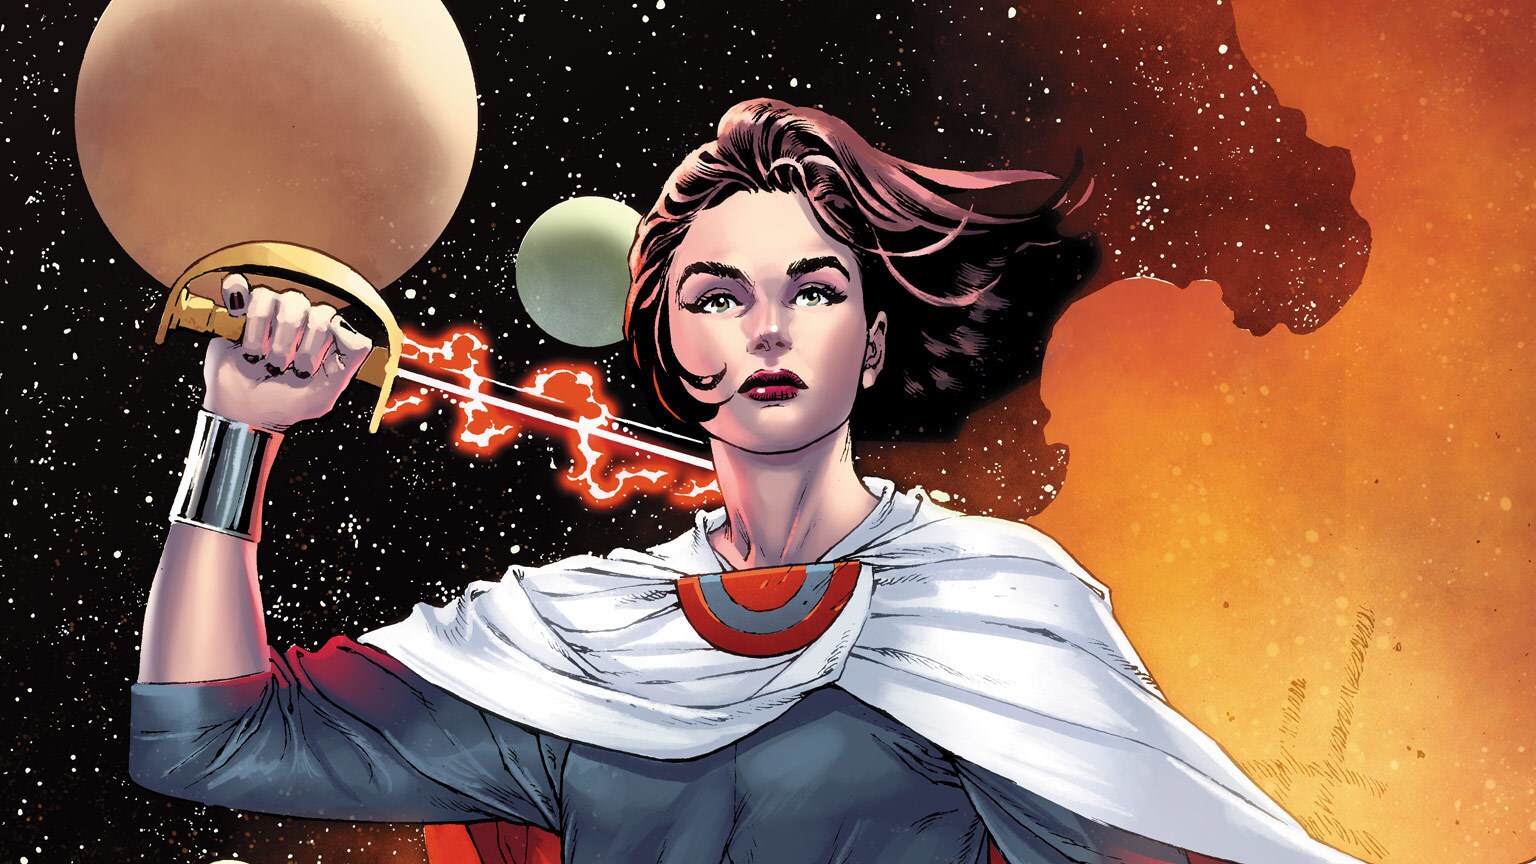 Hidden Empire Revealed: Charles Soule on Marvel's Next Star Wars Epic - Exclusive